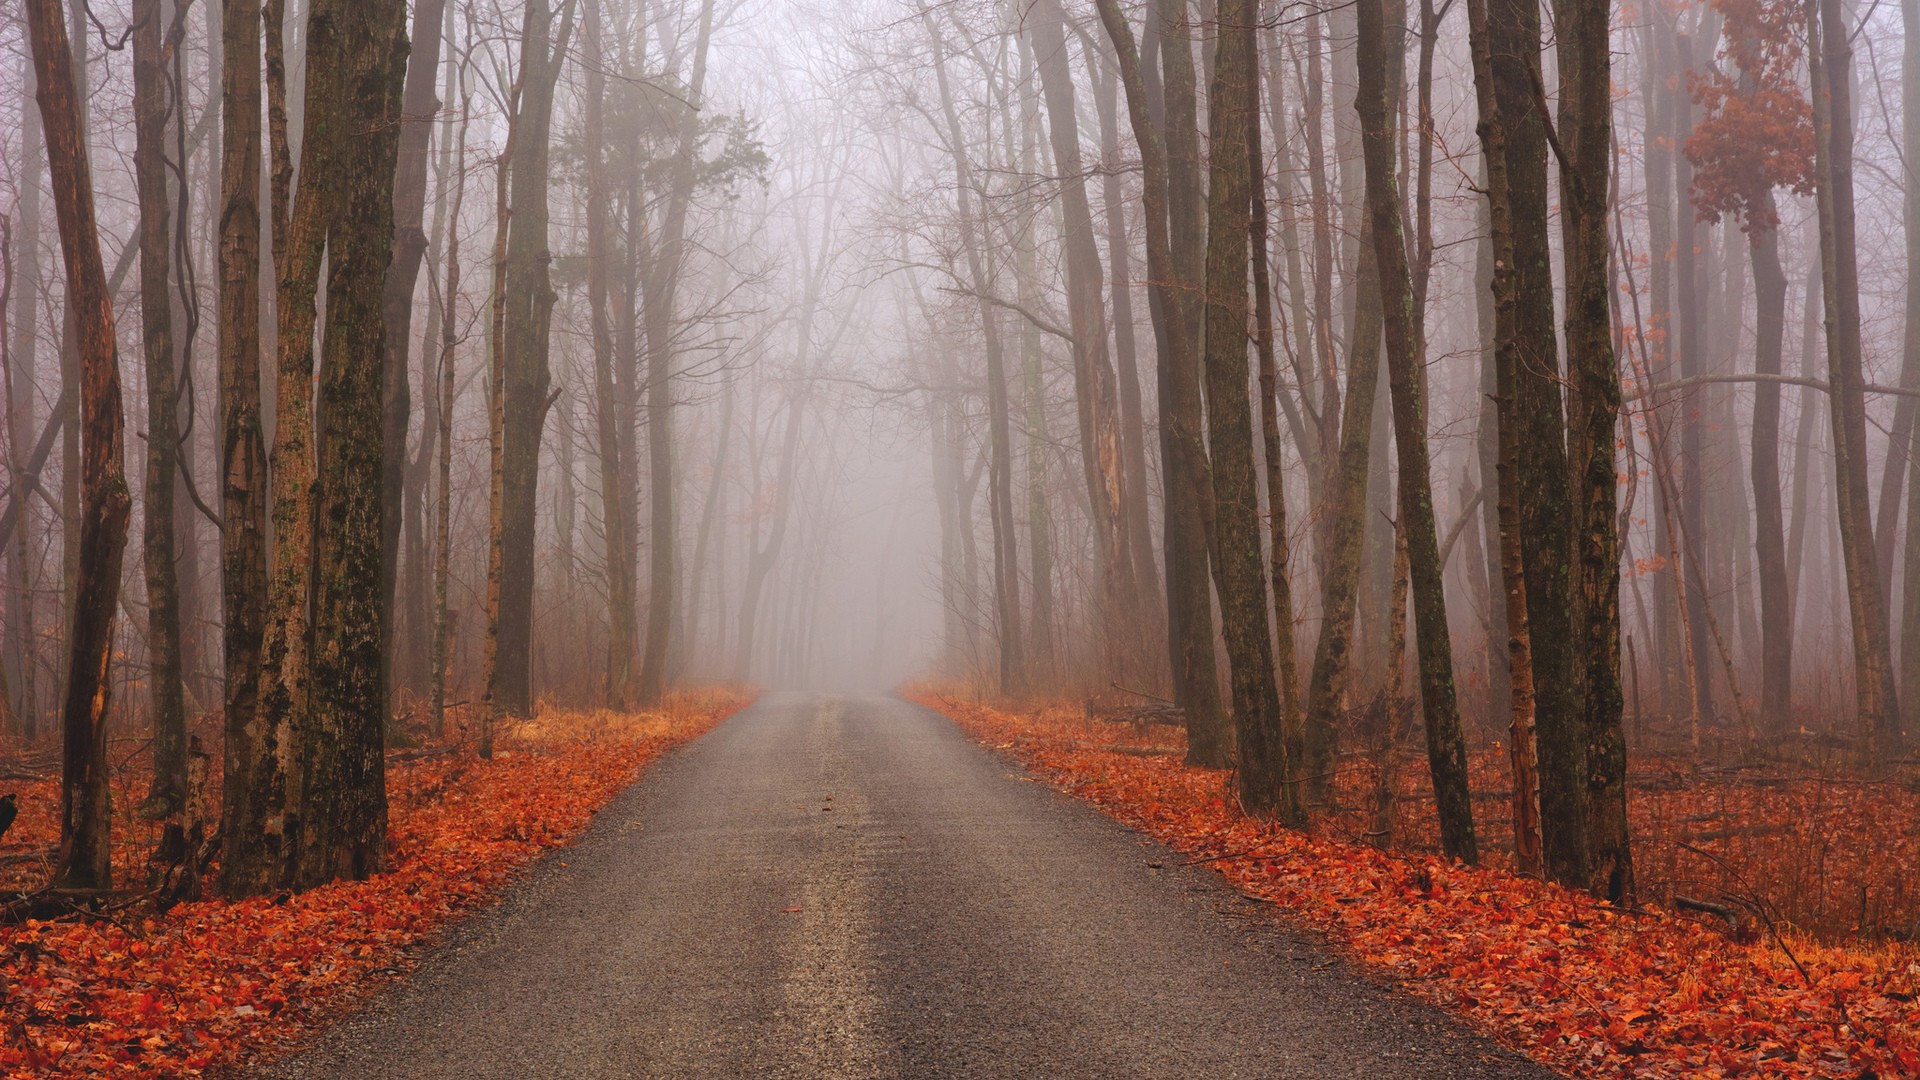 General 1920x1080 nature trees forest road fall branch mist